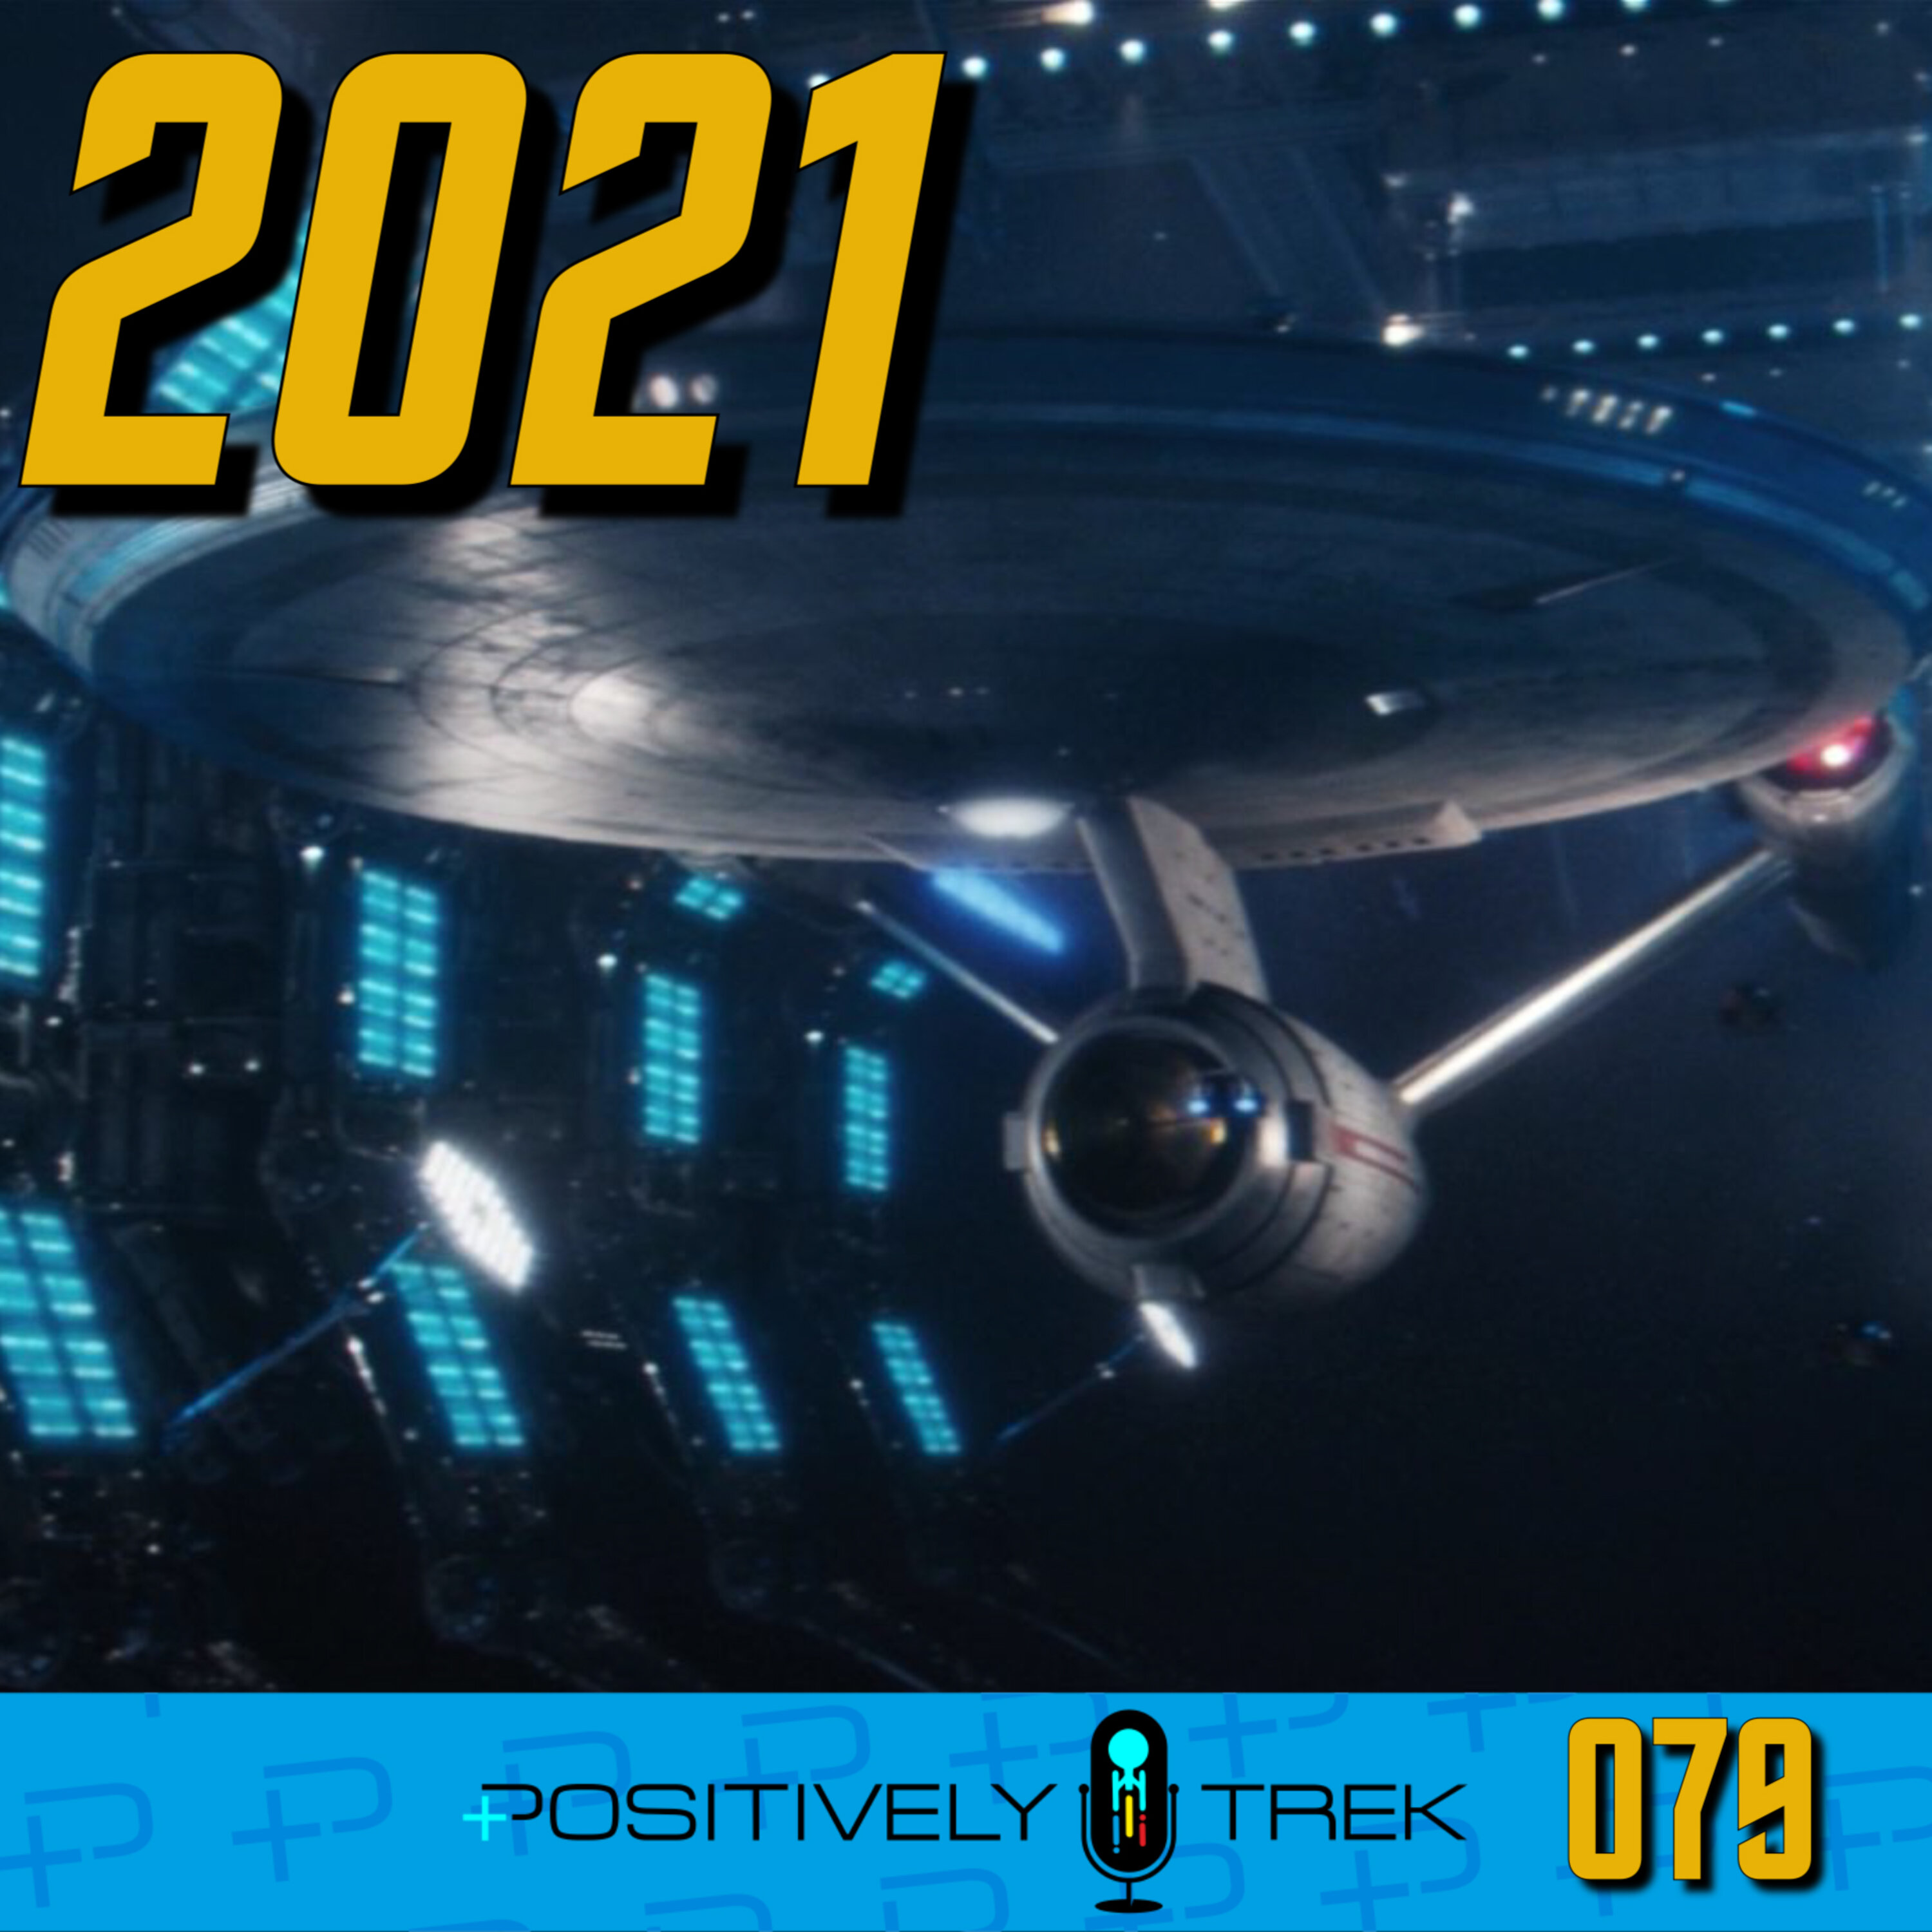 The State of Star Trek in 2021 Image